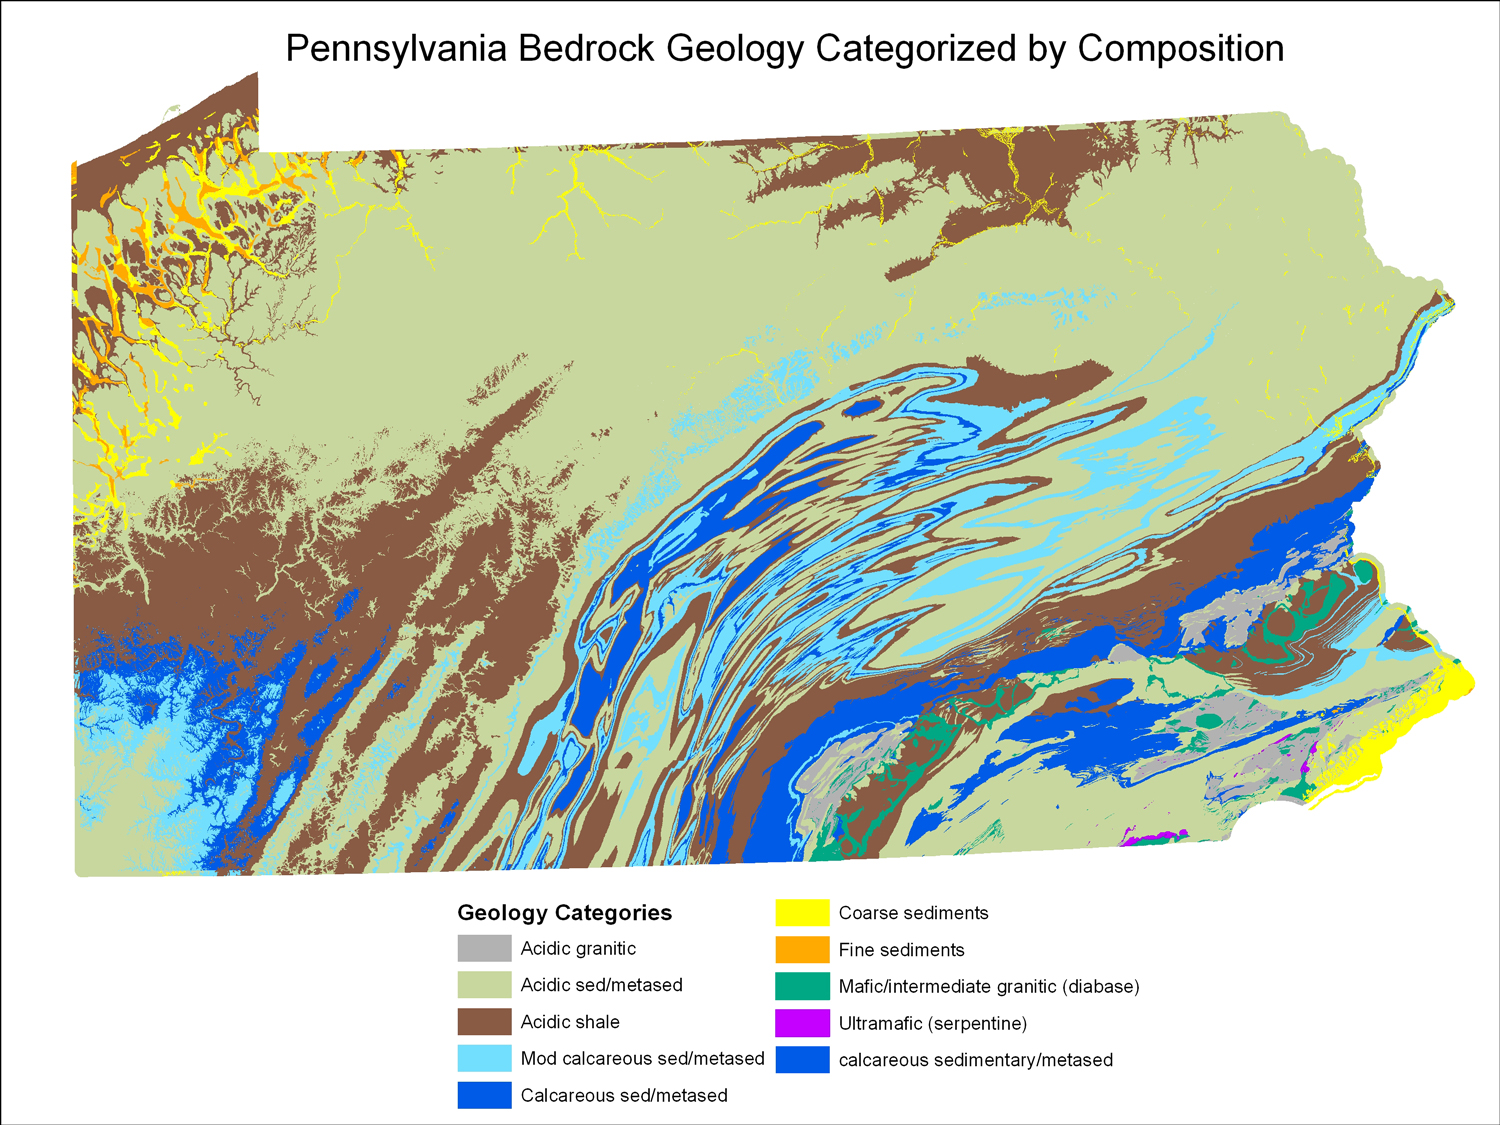 Bedrock geology determines the extent of limestone habitats in Pennsylvania. Blue areas are strongly calcareous, while light blue are moderately calcareous. Glacial deposits in the northwest are also calcareous, and most fens are found along the yellow and orange veins indicating the presence of these sediments